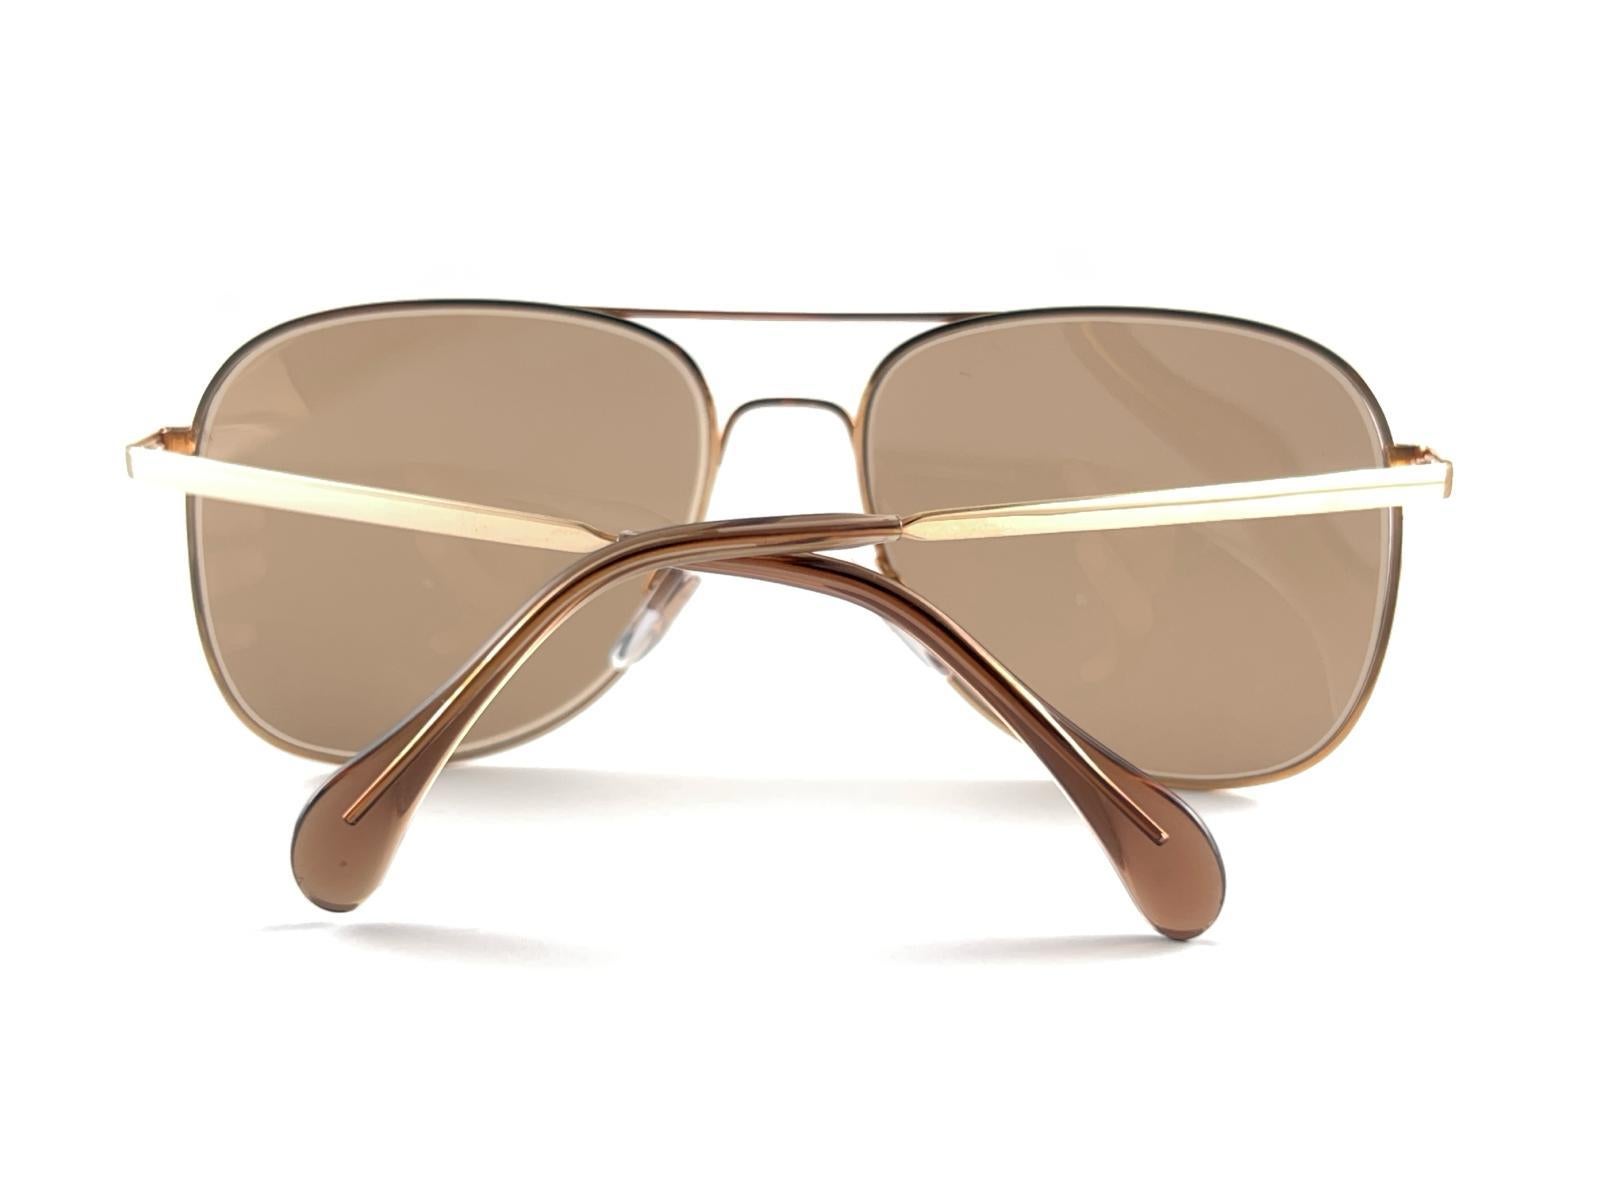 New Vintage Menrad 633 Oversized Gold Frame Sunglasses 1970'S Made In Germany For Sale 4